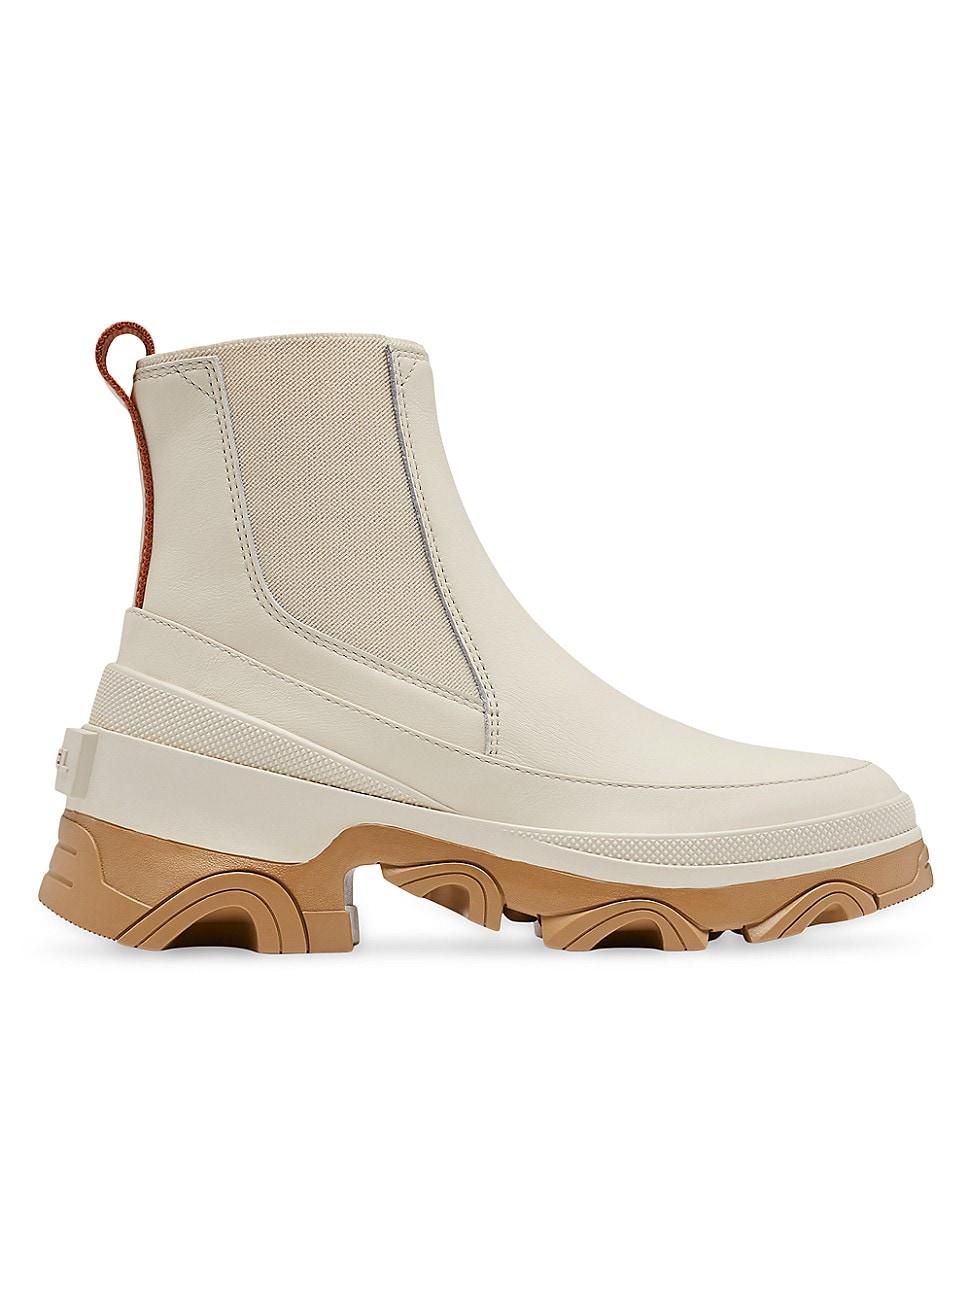 Sorel Brex Leather Chelsea Boots in White | Lyst